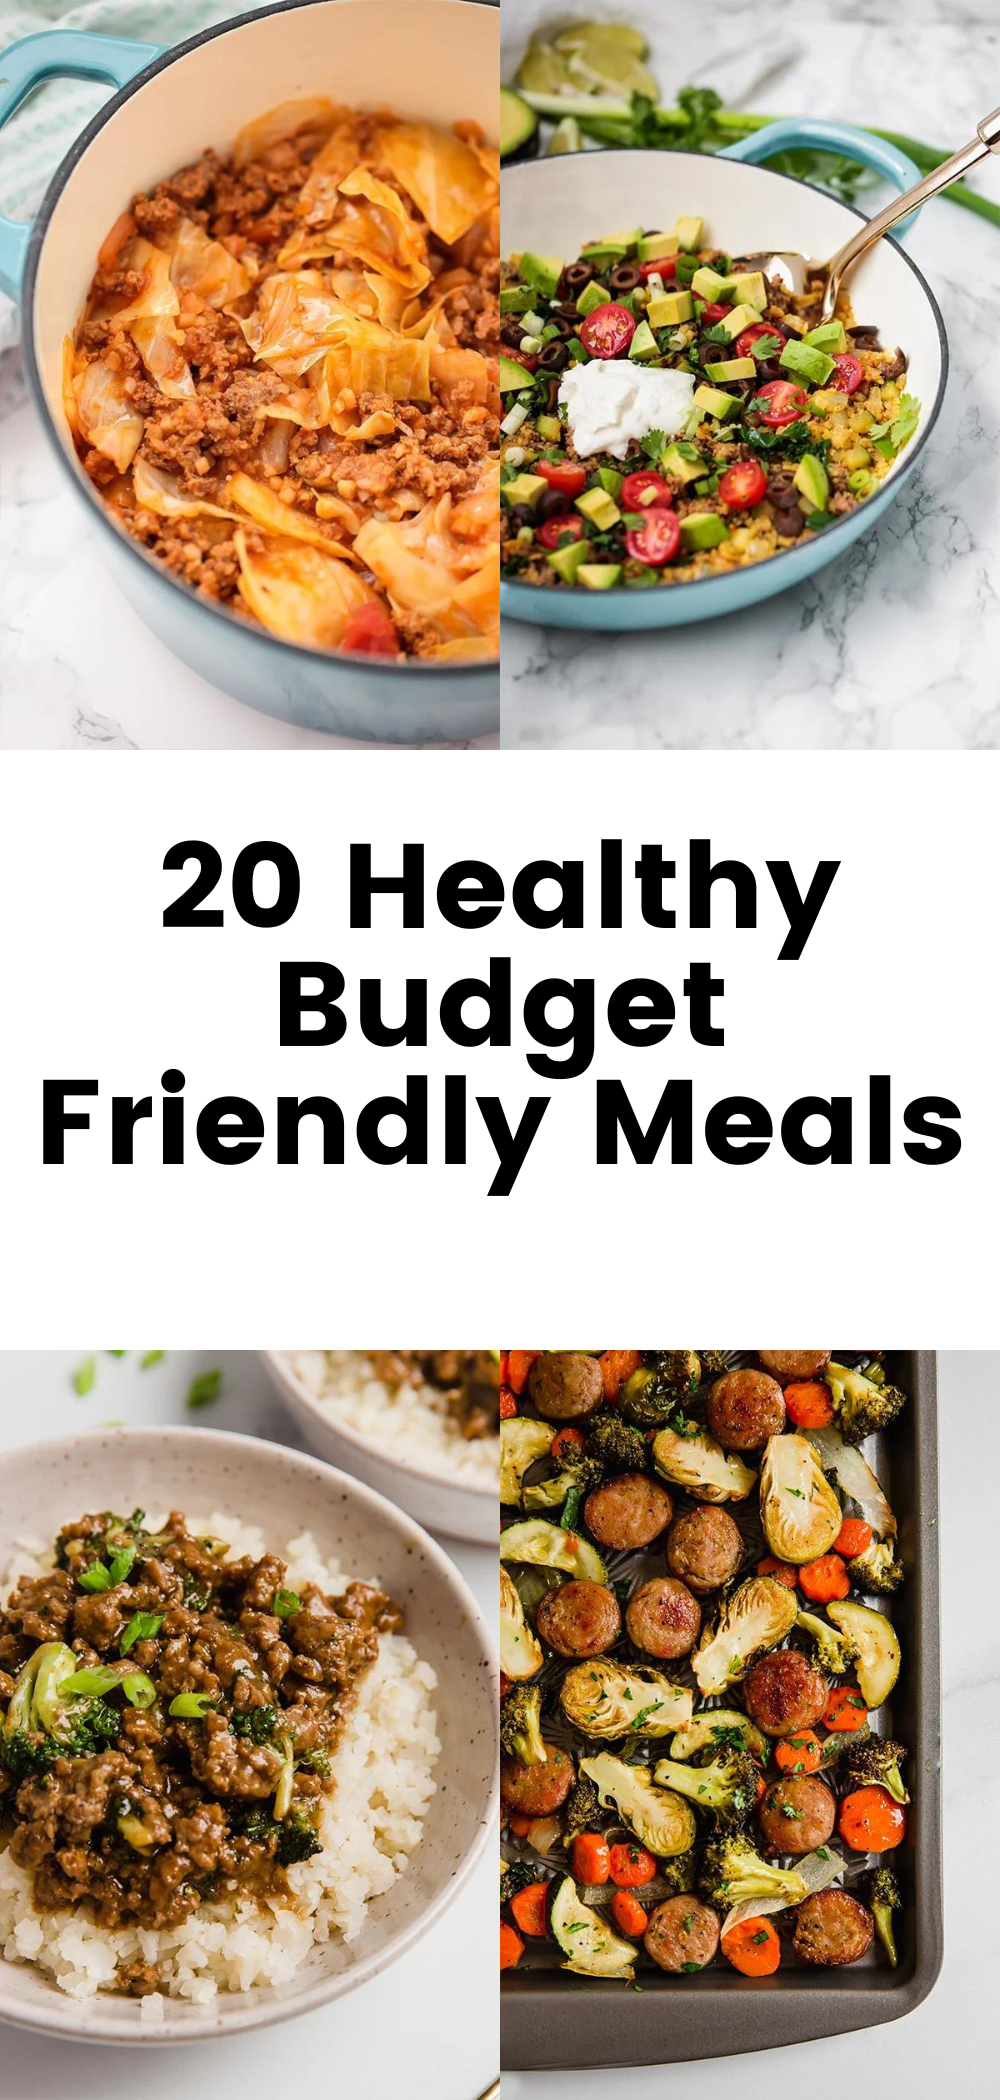 Accessible and budget-friendly meals